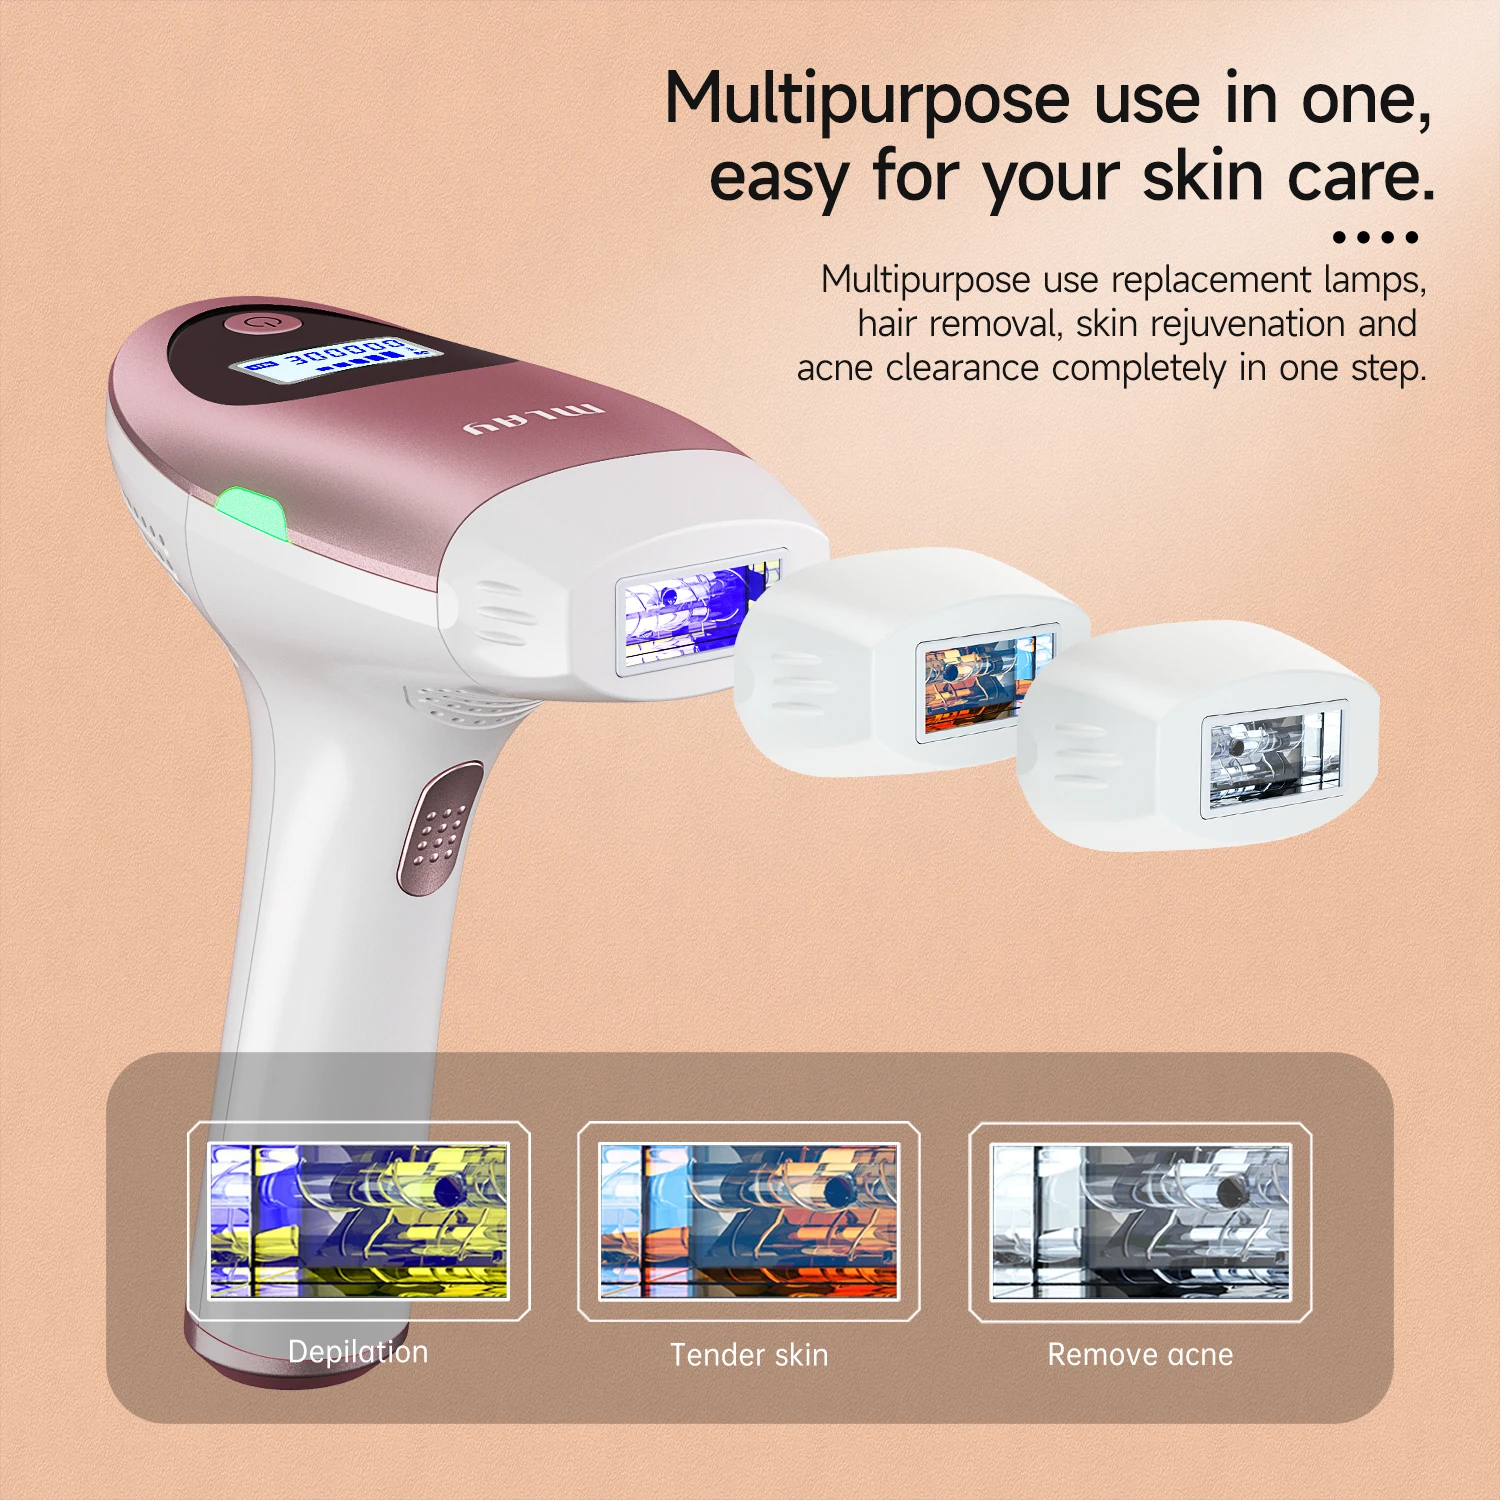 MLAY T3 Portable IPL Hair Removal Device Hot Selling for Whole Body Home Use Features Skin Rejuvenation Acne Treatment